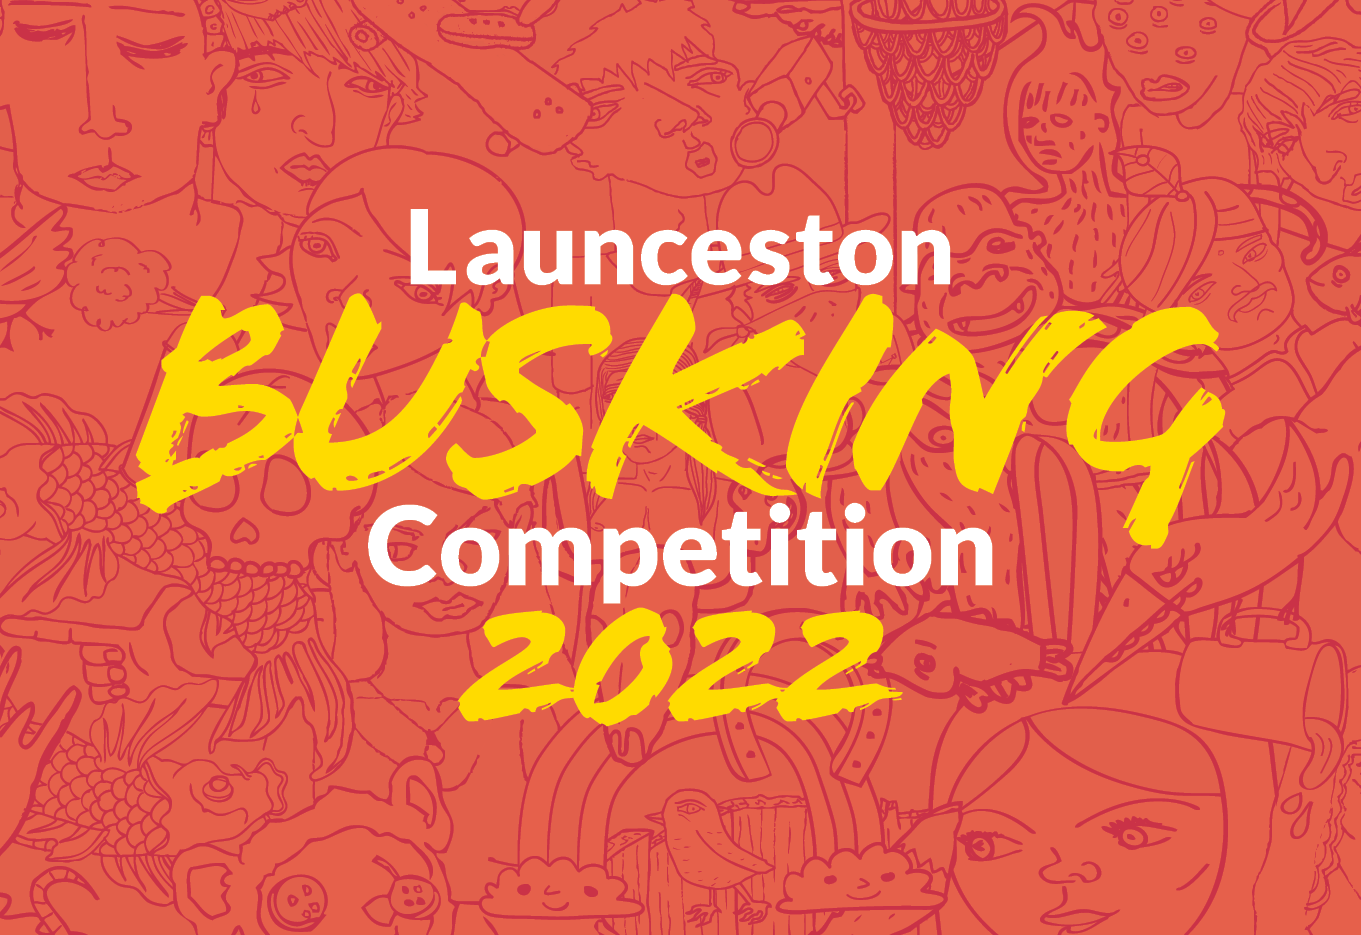 Busking Competition Landing Page.png